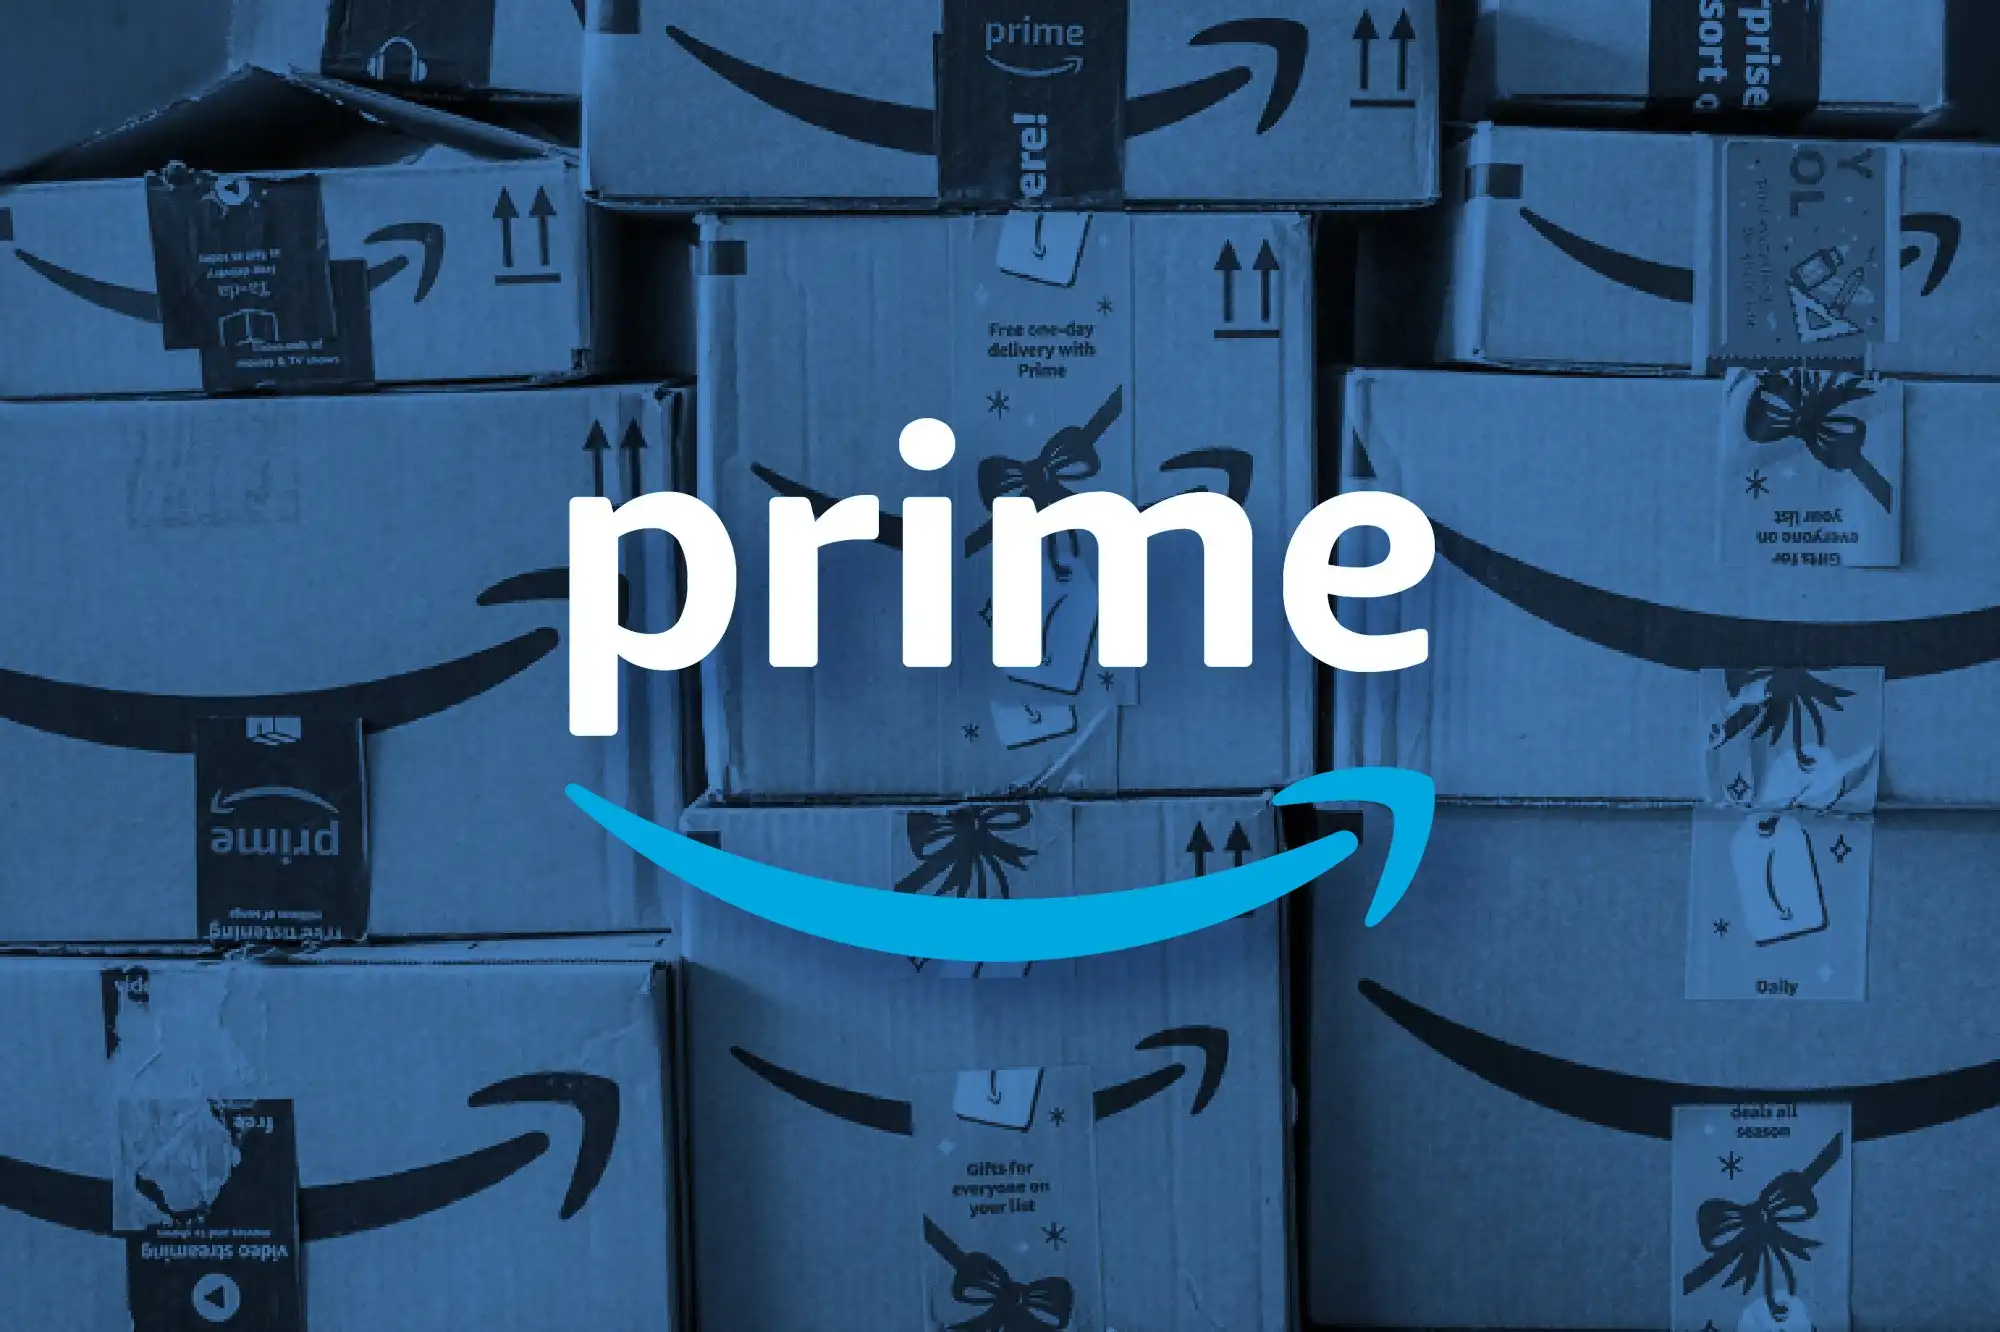 UK: Amazon Prime Subscription Price To Increase By £1